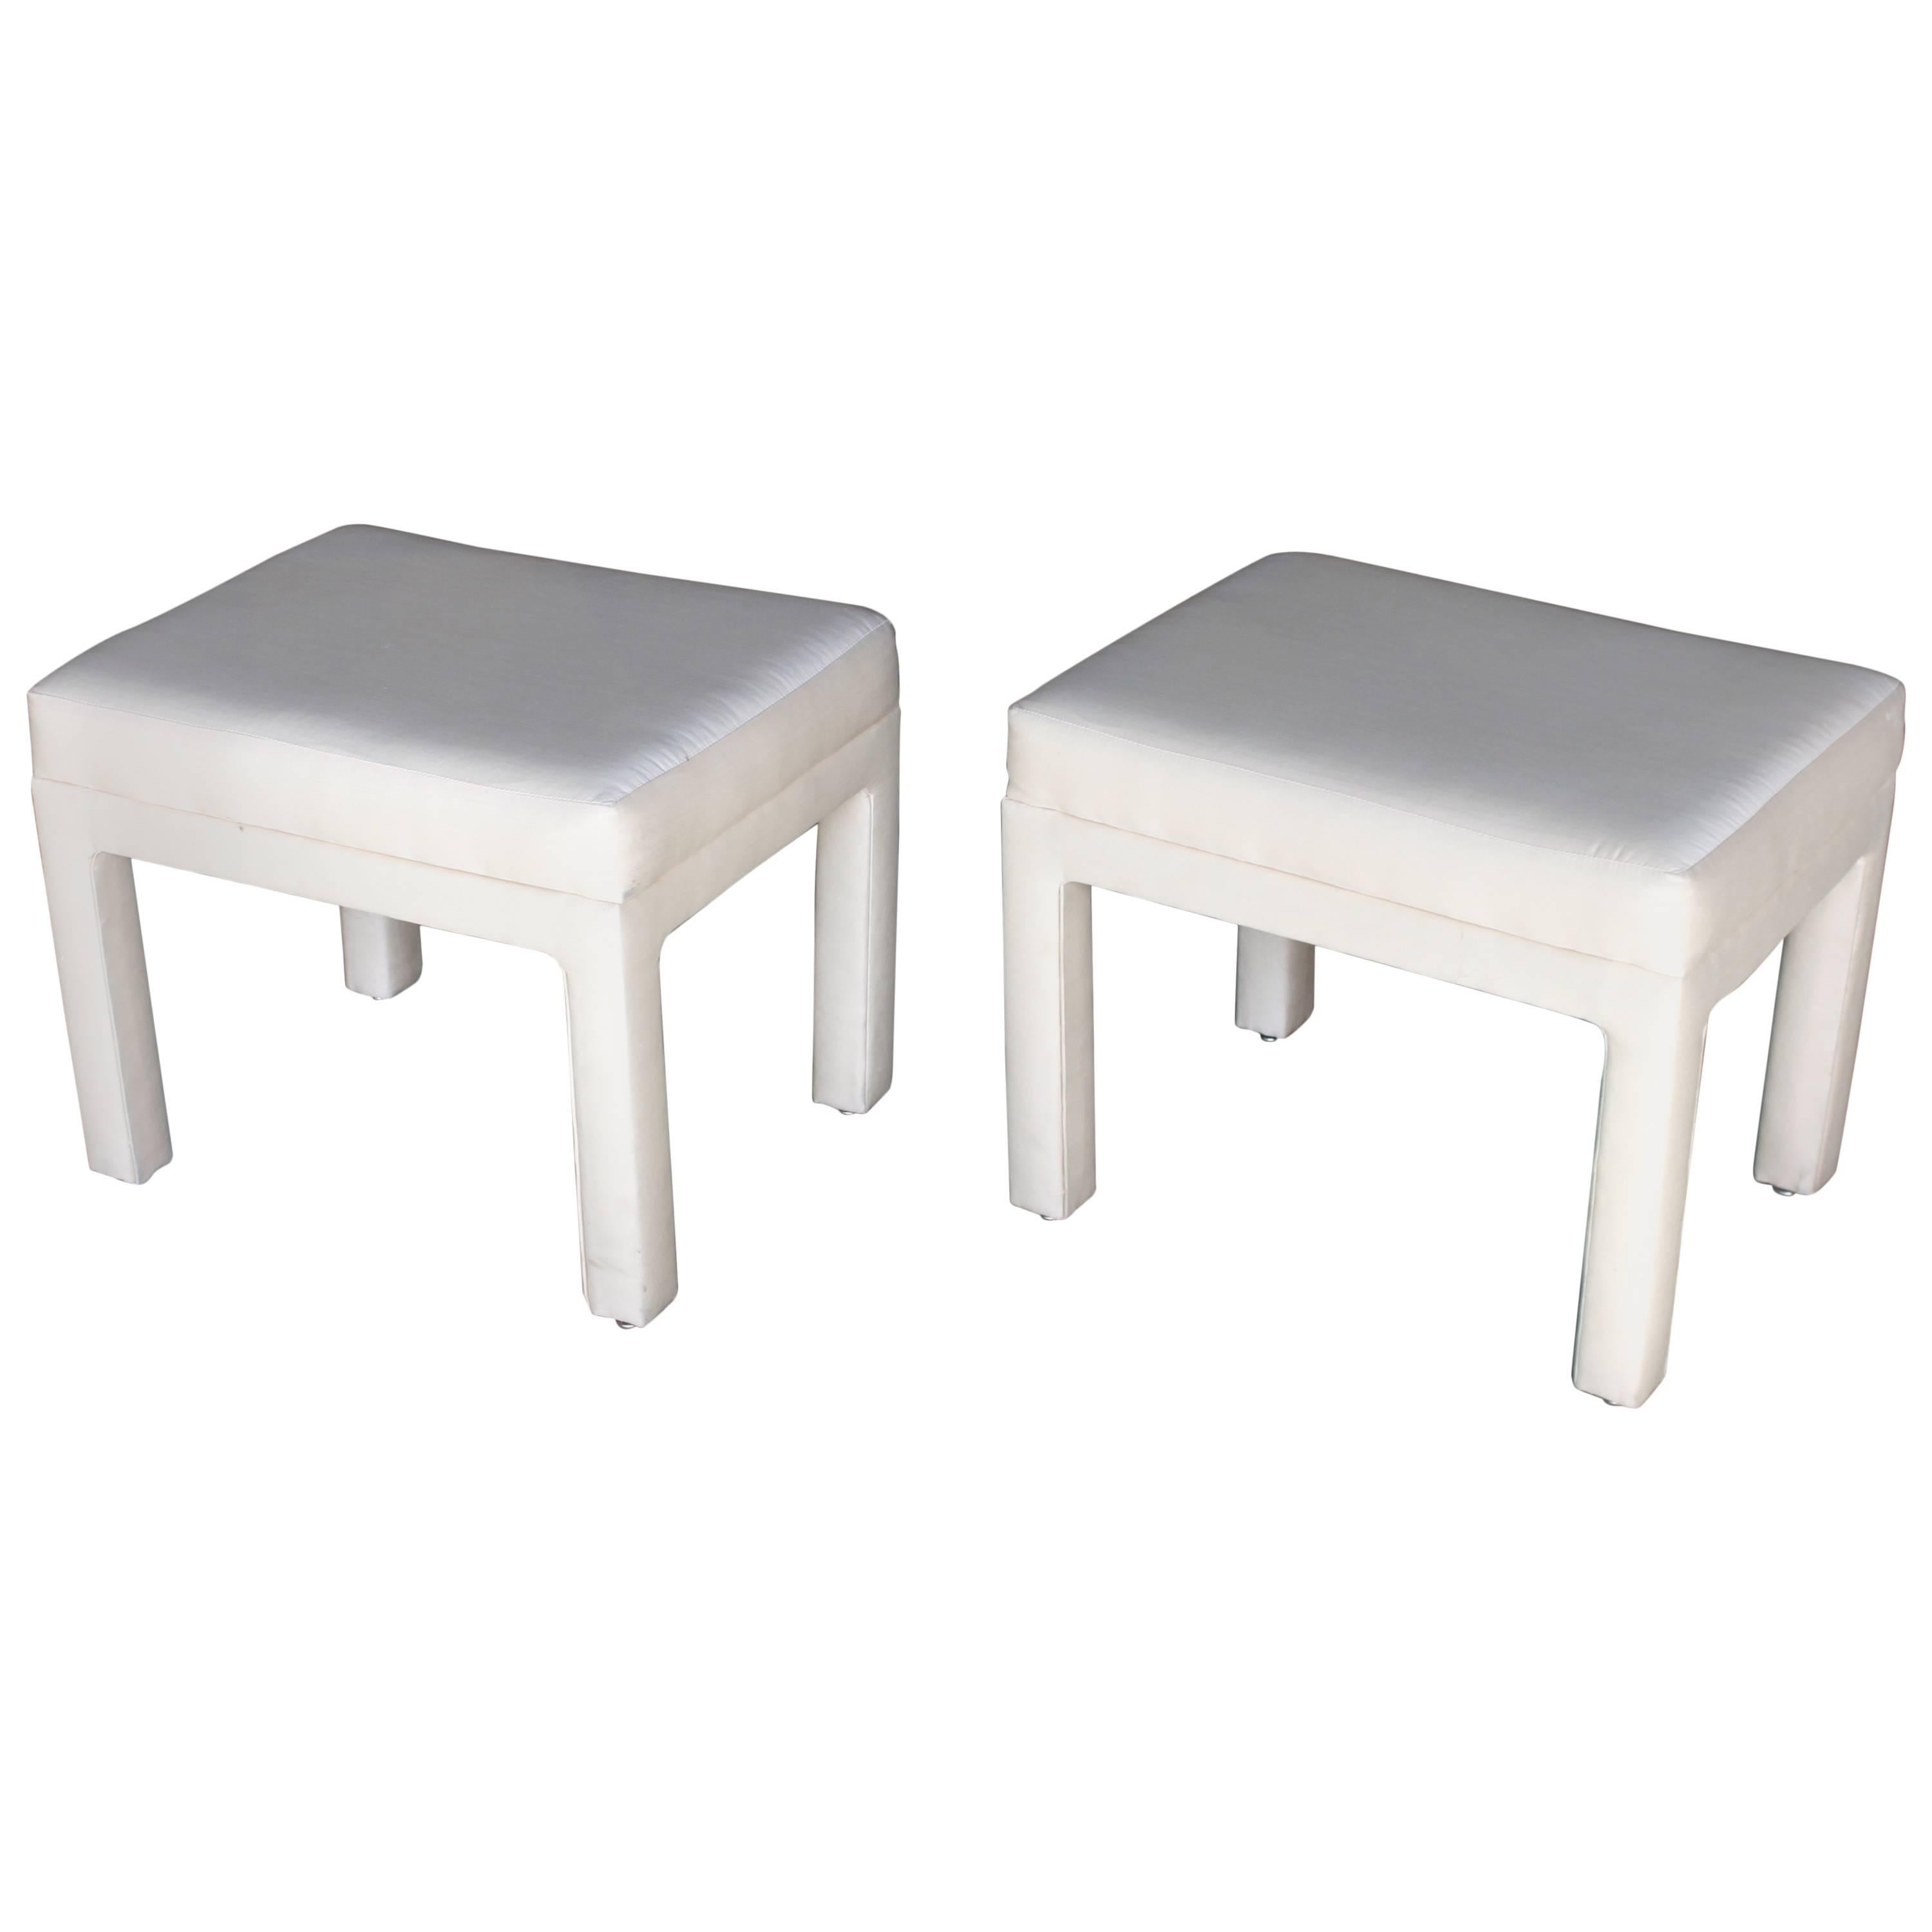 Pair of Upholstered Stools